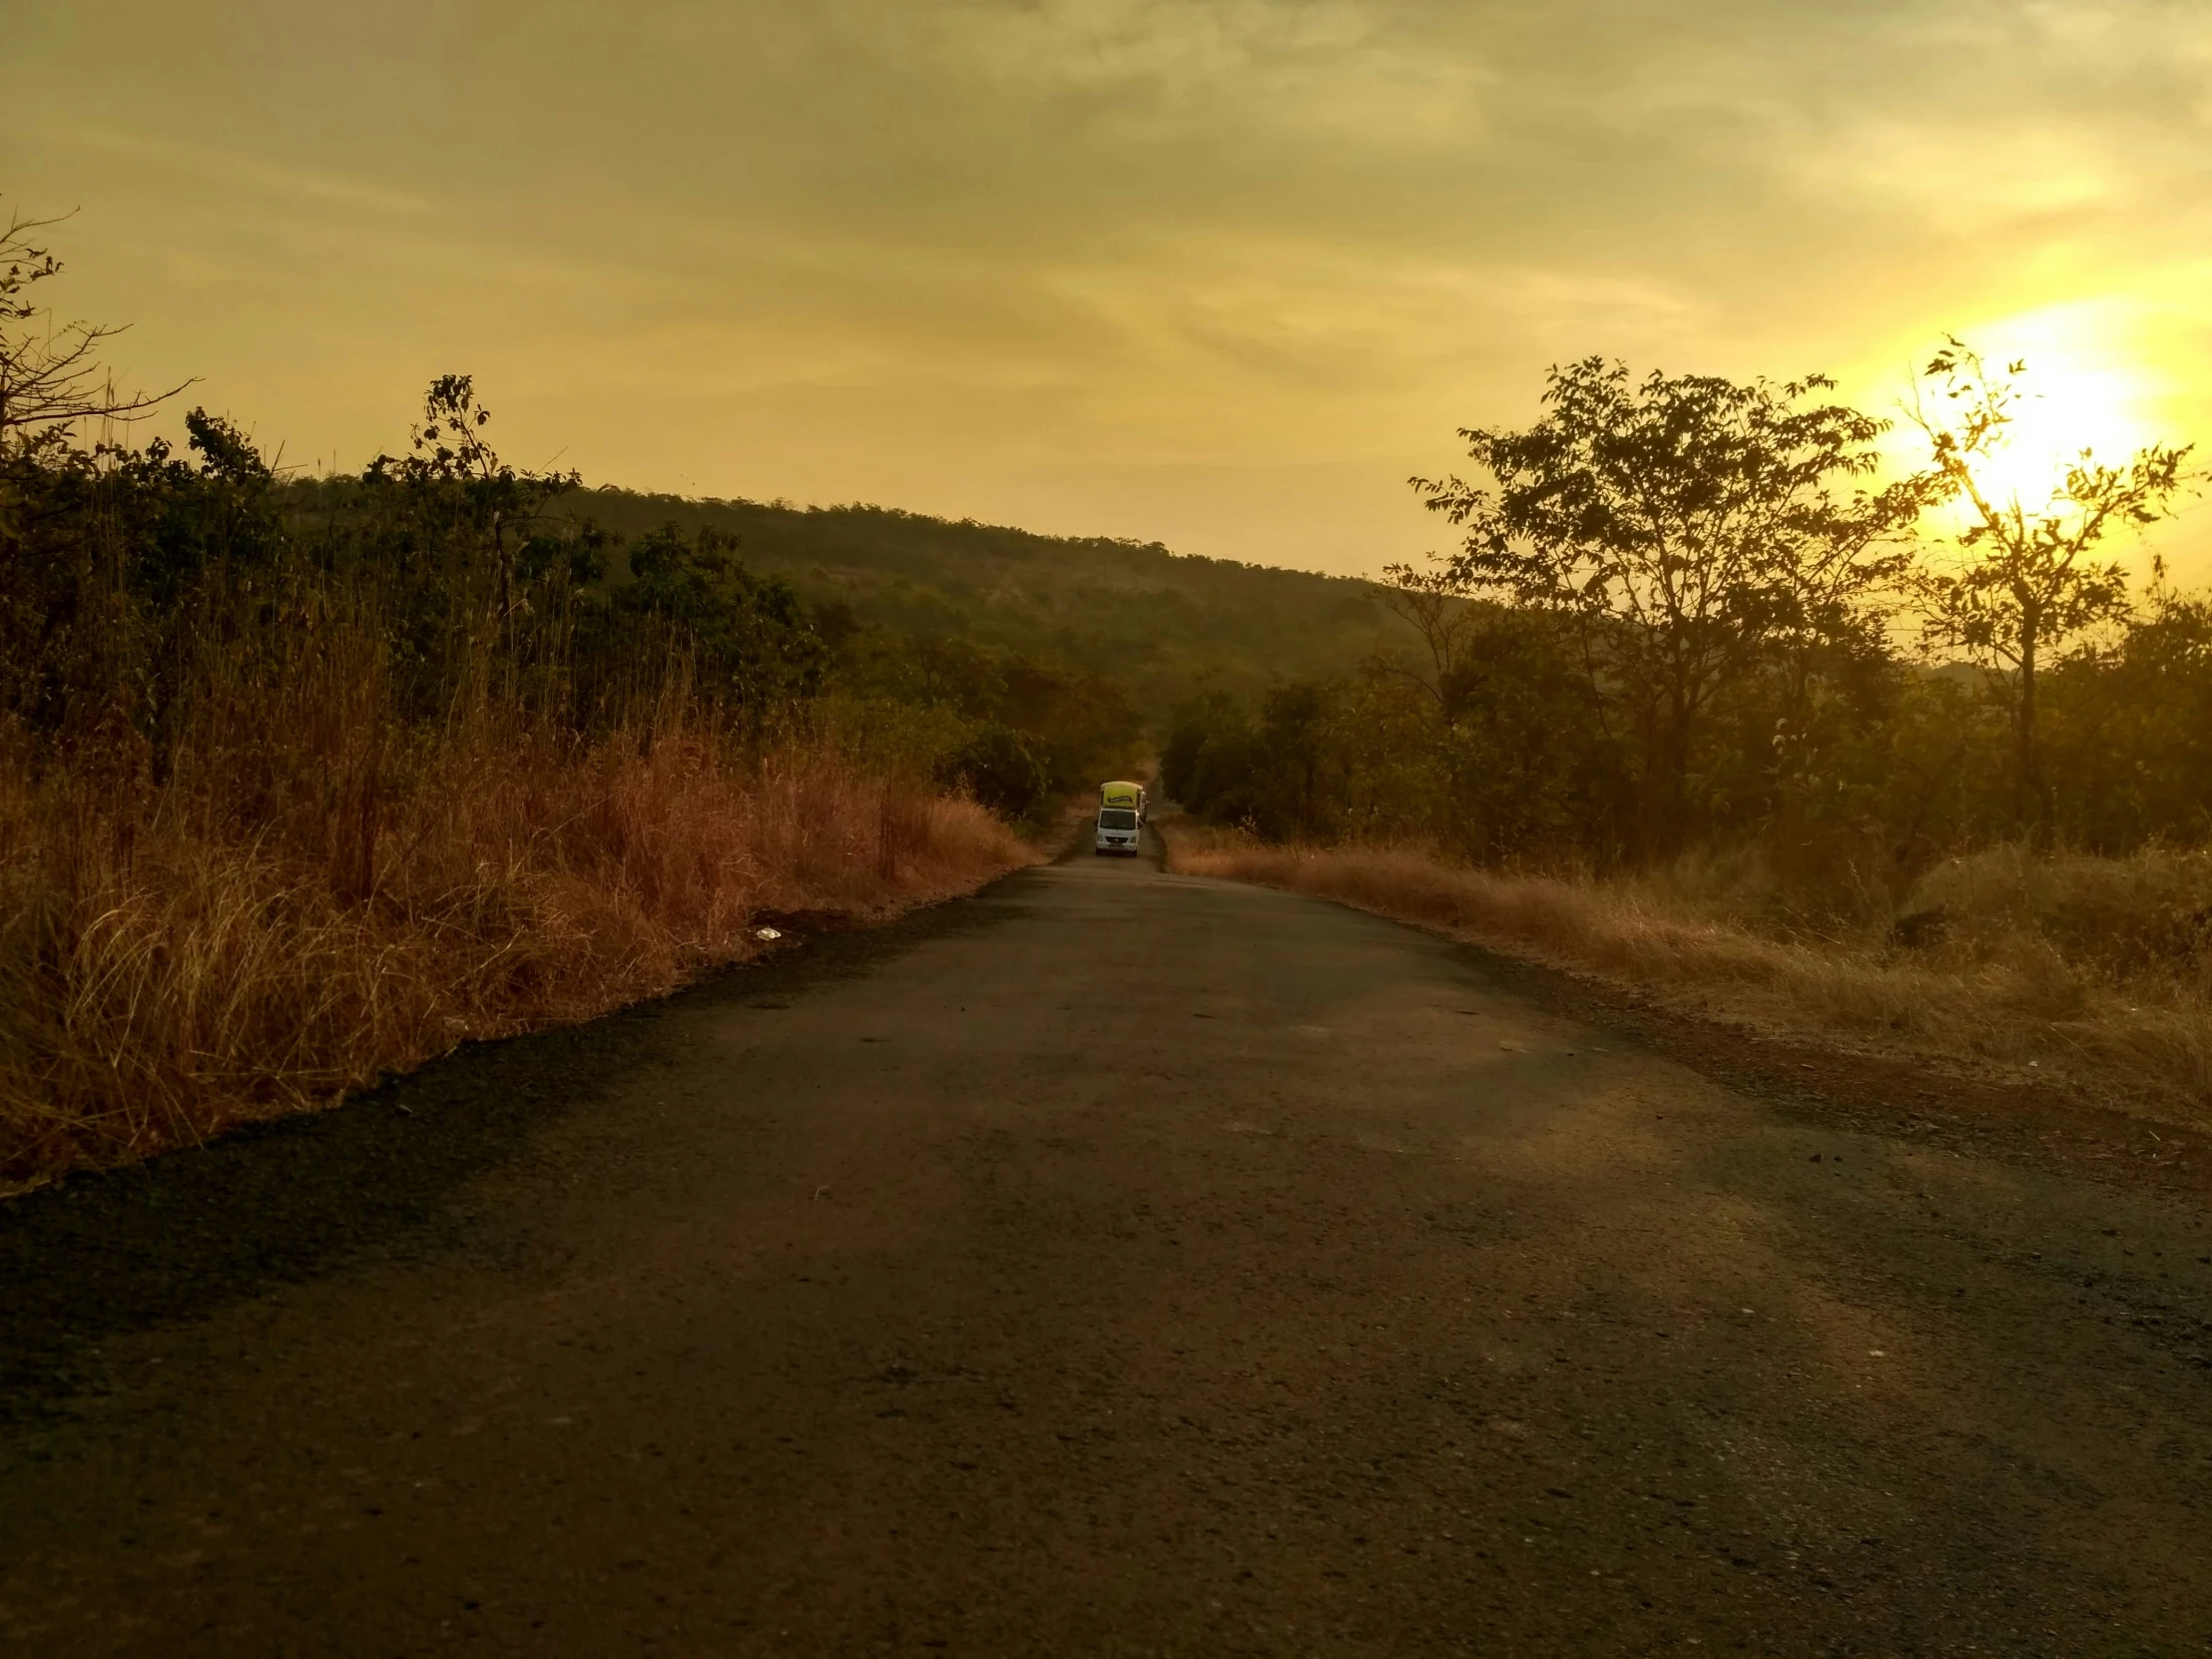 the sun sets in the distance over a deserted road